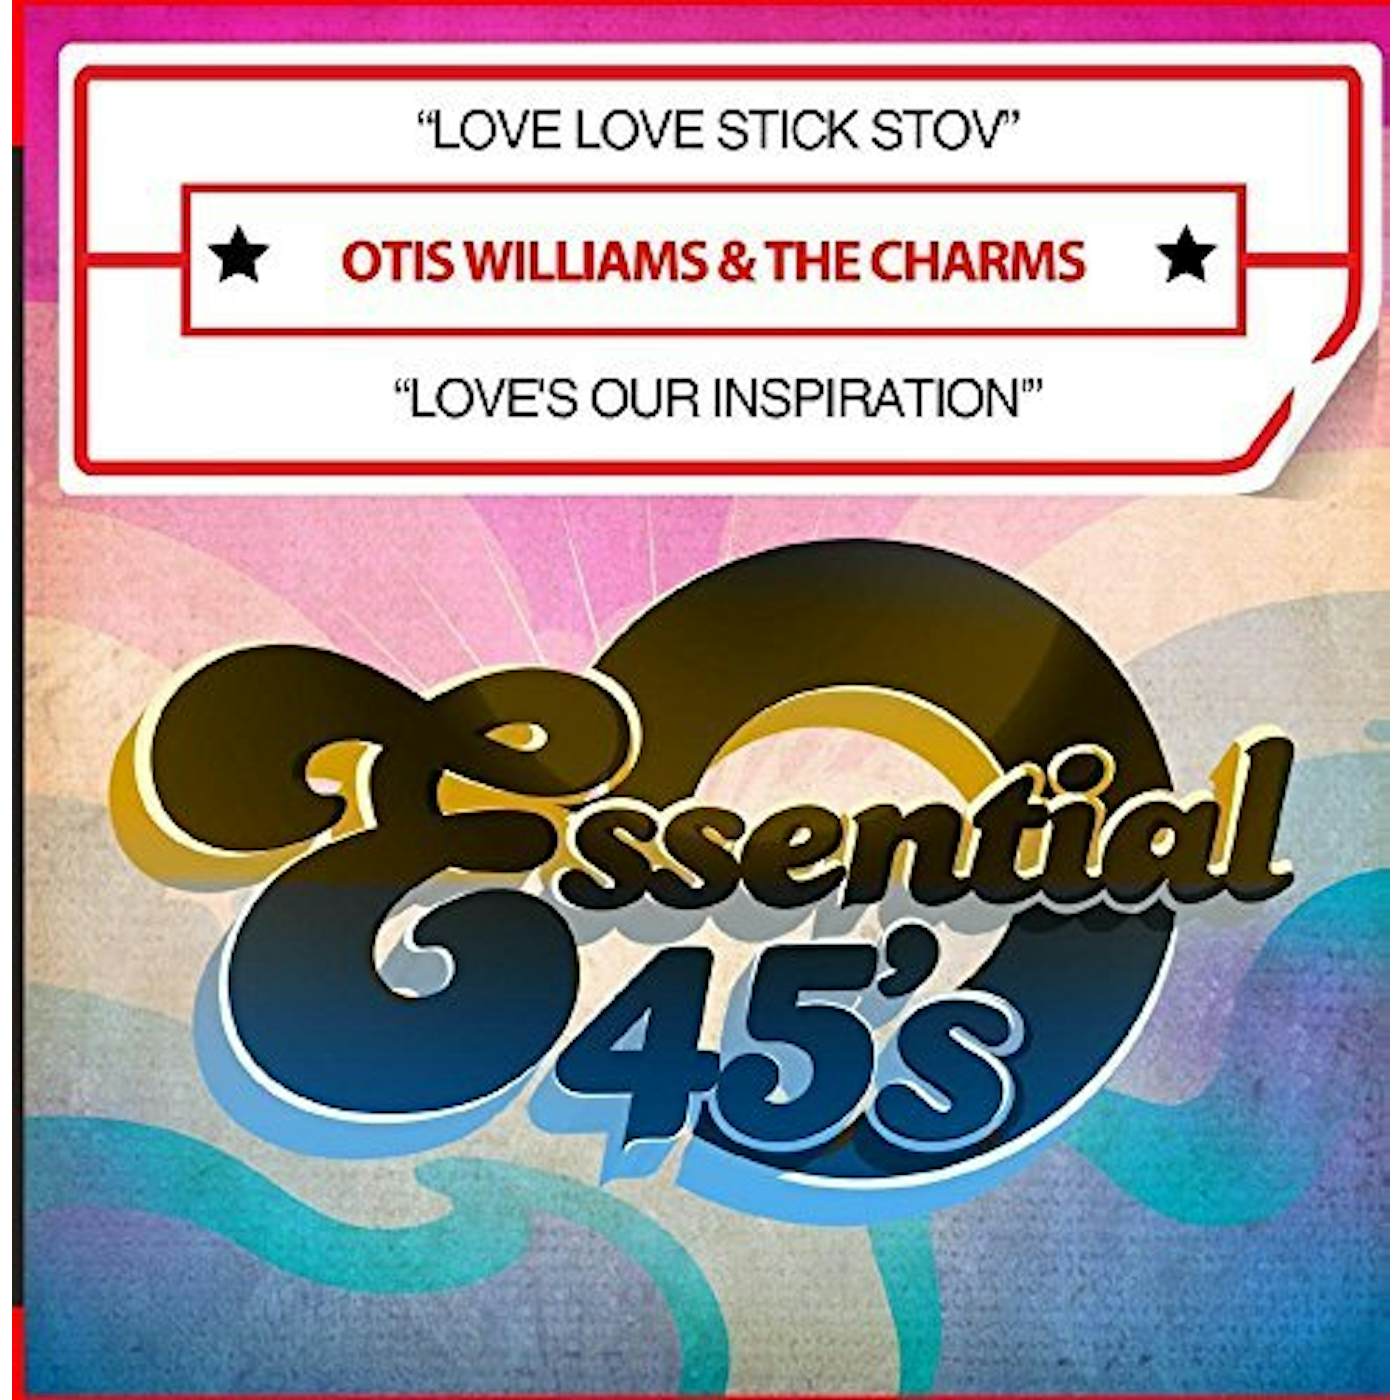 Otis Williams & The Charms LOVE LOVE STICK STOV / LOVE'S OUR INSPIRATION CD